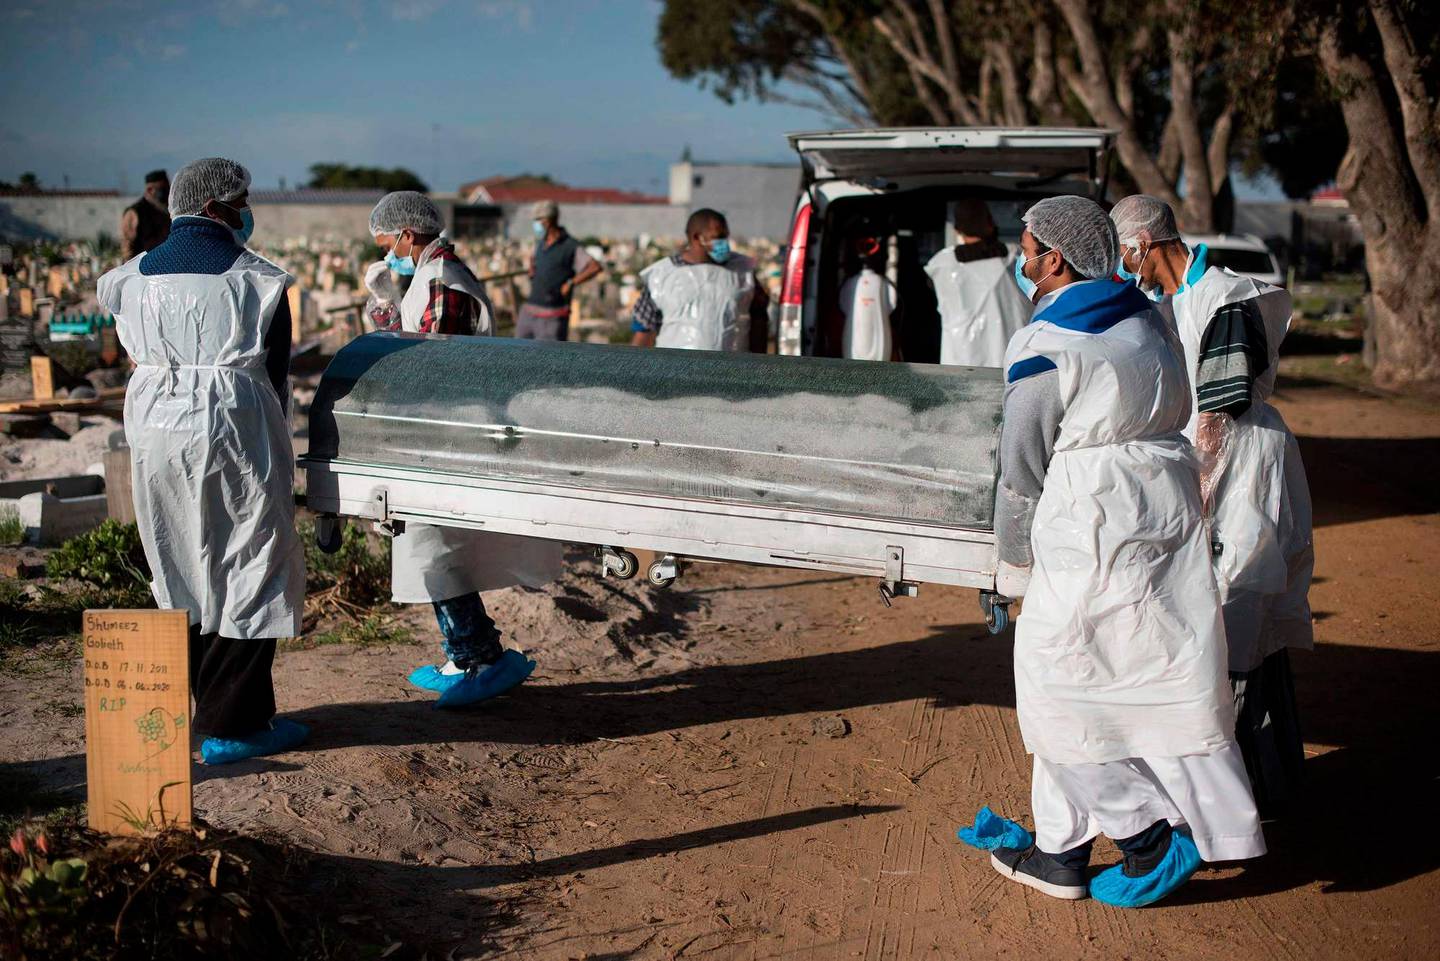 TOPSHOT - Members of a family dressed in personal protective equipment (PPE) carry the casket containing the body of a man who died of COVID-19 coronavirus for a Muslim burial at the Klip Road Cemetry in Grassy Park, Cape Town, on June 9, 2020. - The 54 year old school taxi driver died earlier in the day. (Photo by RODGER BOSCH / AFP)